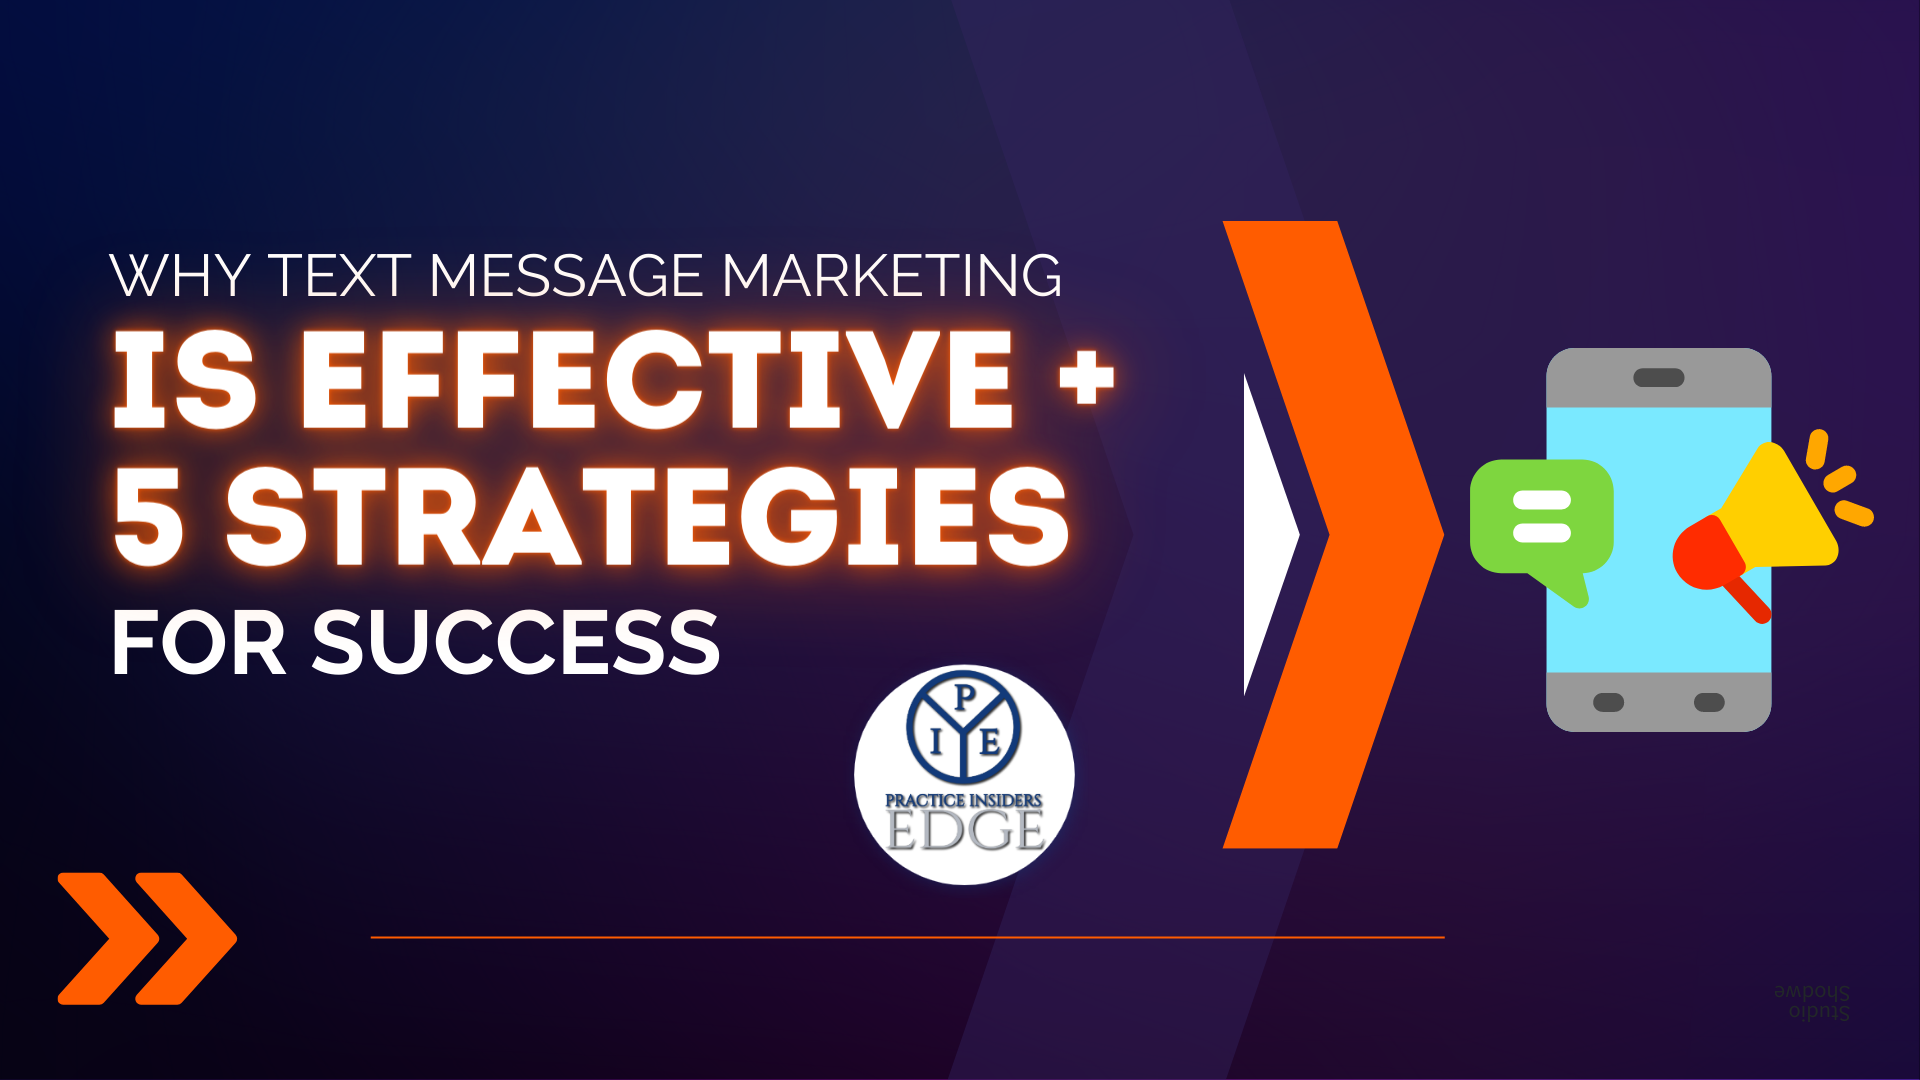 Why Text Message Marketing is Effective and 5 Strategies for Success